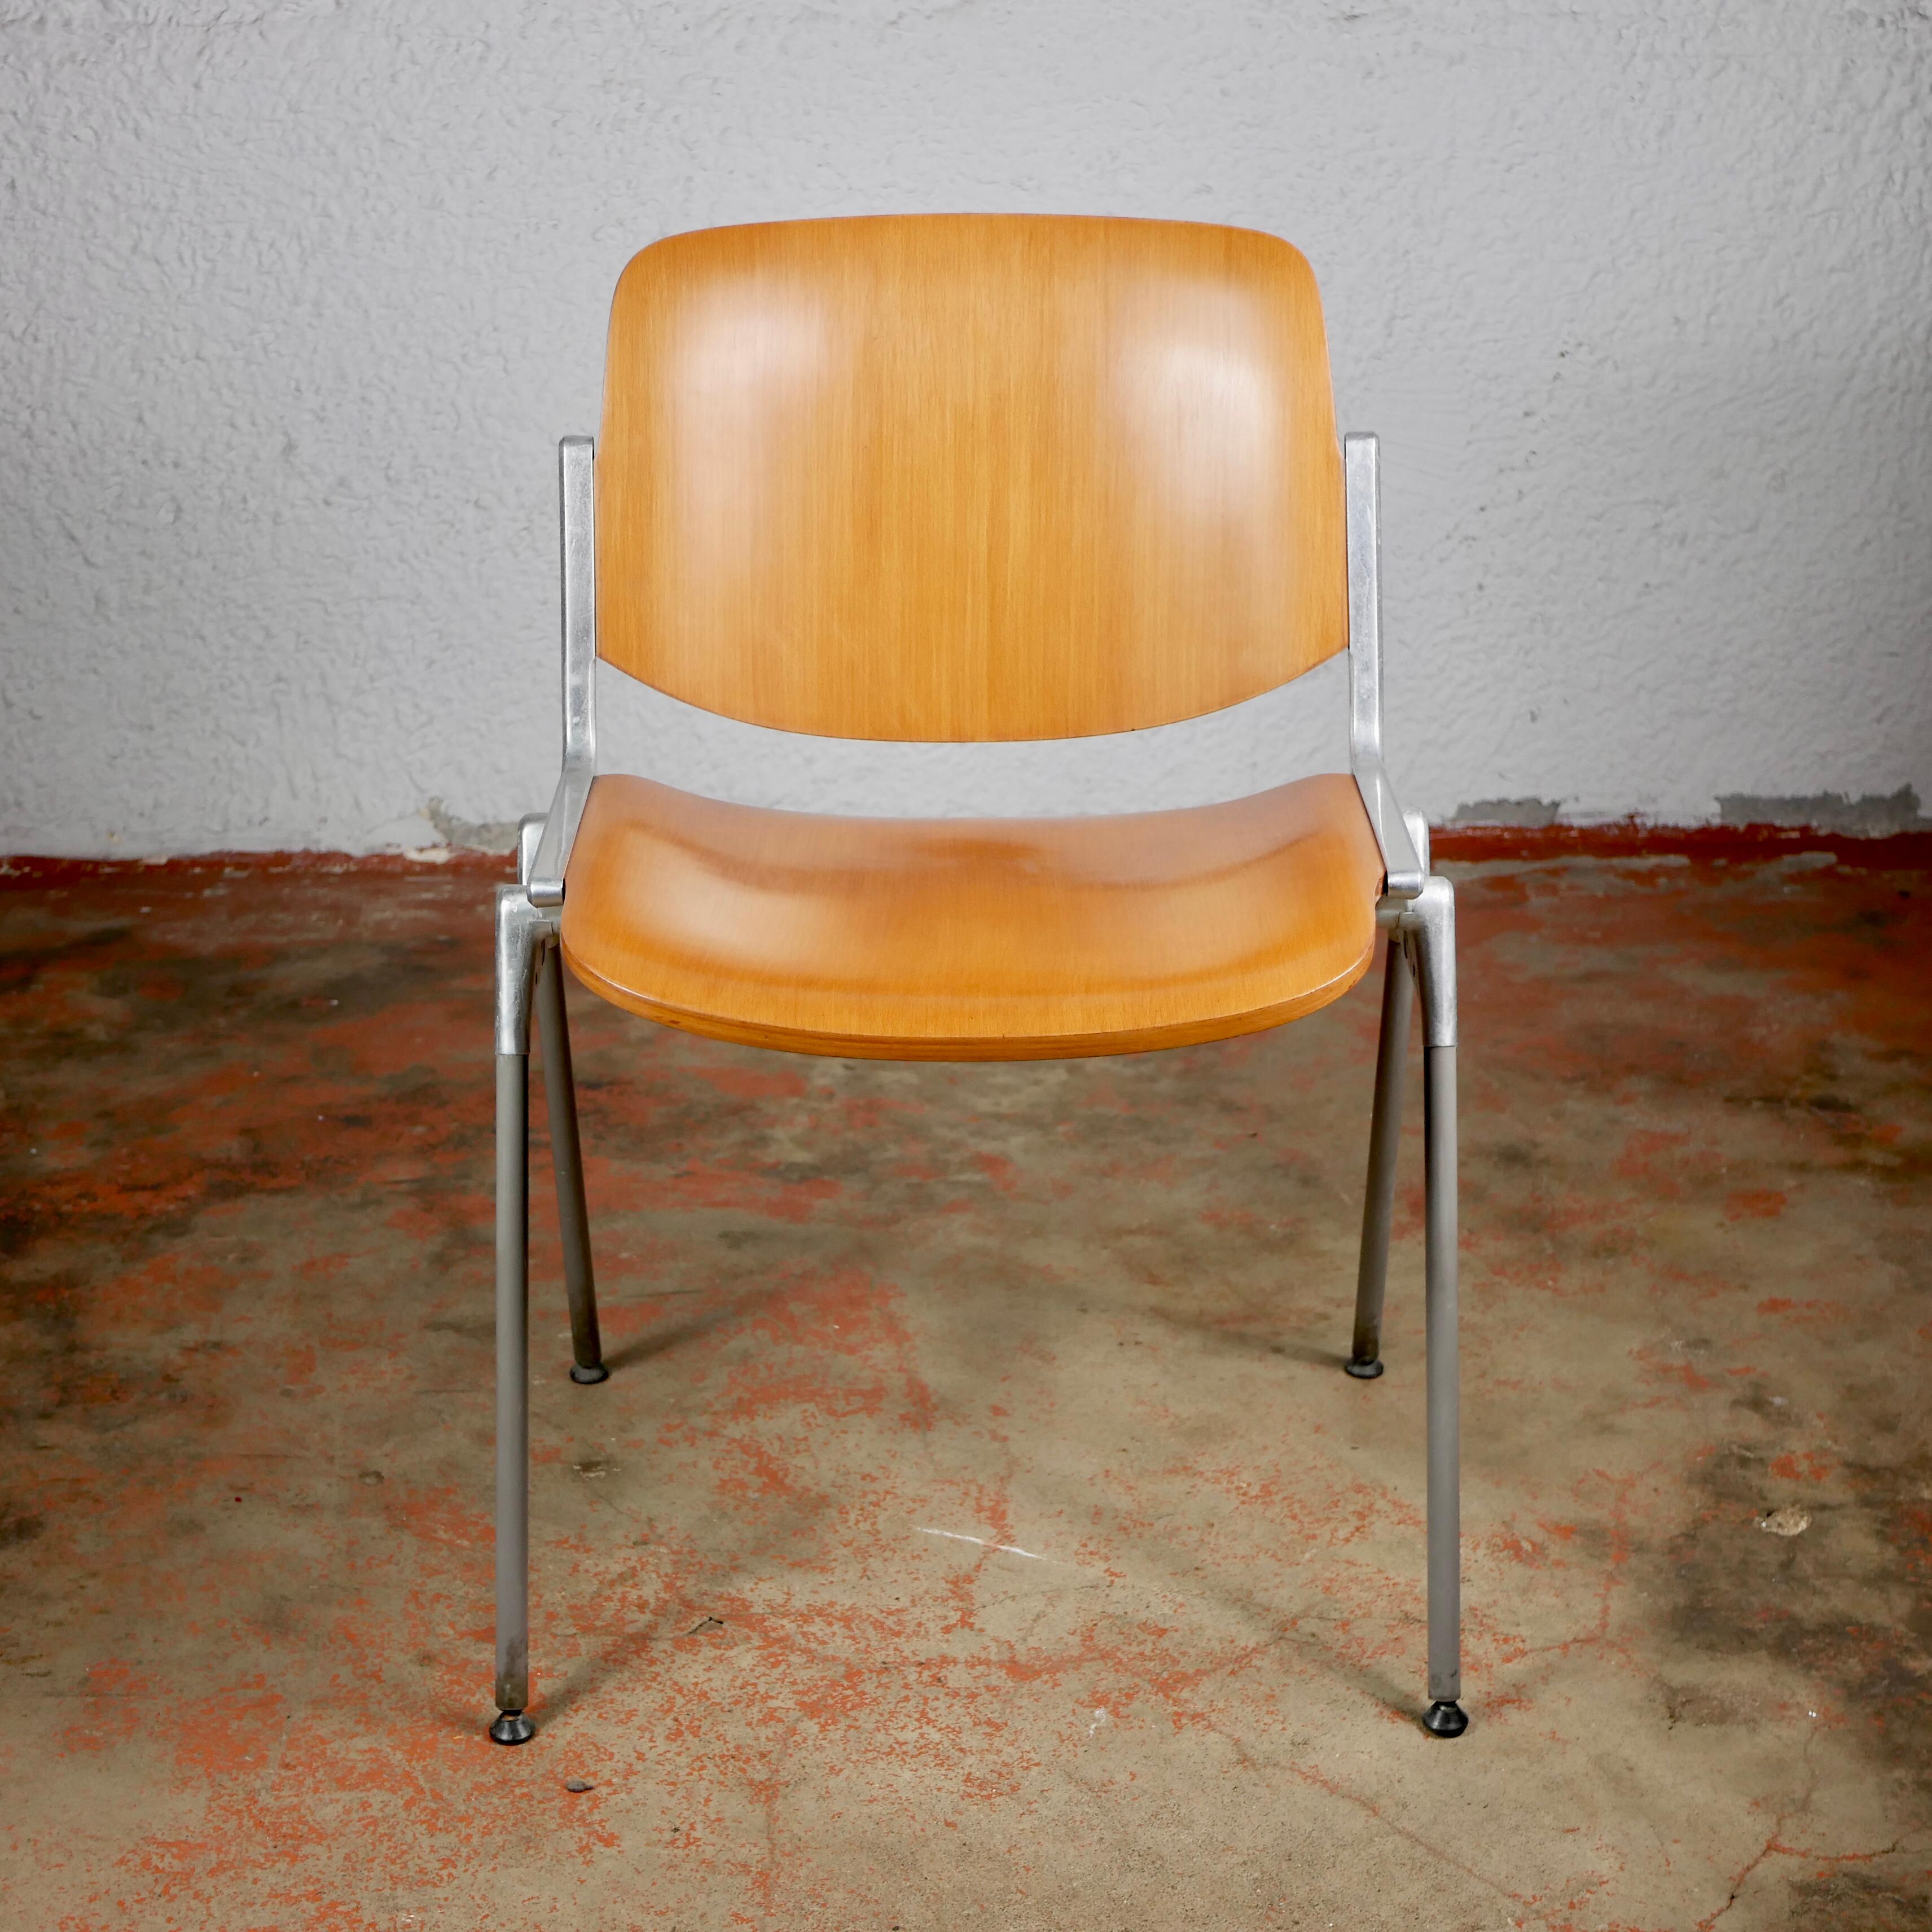 Beautiful, elegant, and in wood: winner combo.
Famous DSC 106 chair by Giancarlo Piretti for Castelli, created in the 1970. These ones have been made in 1987 et belonged to the Politecnico University of Torino. 
Light scratches.
2 available.